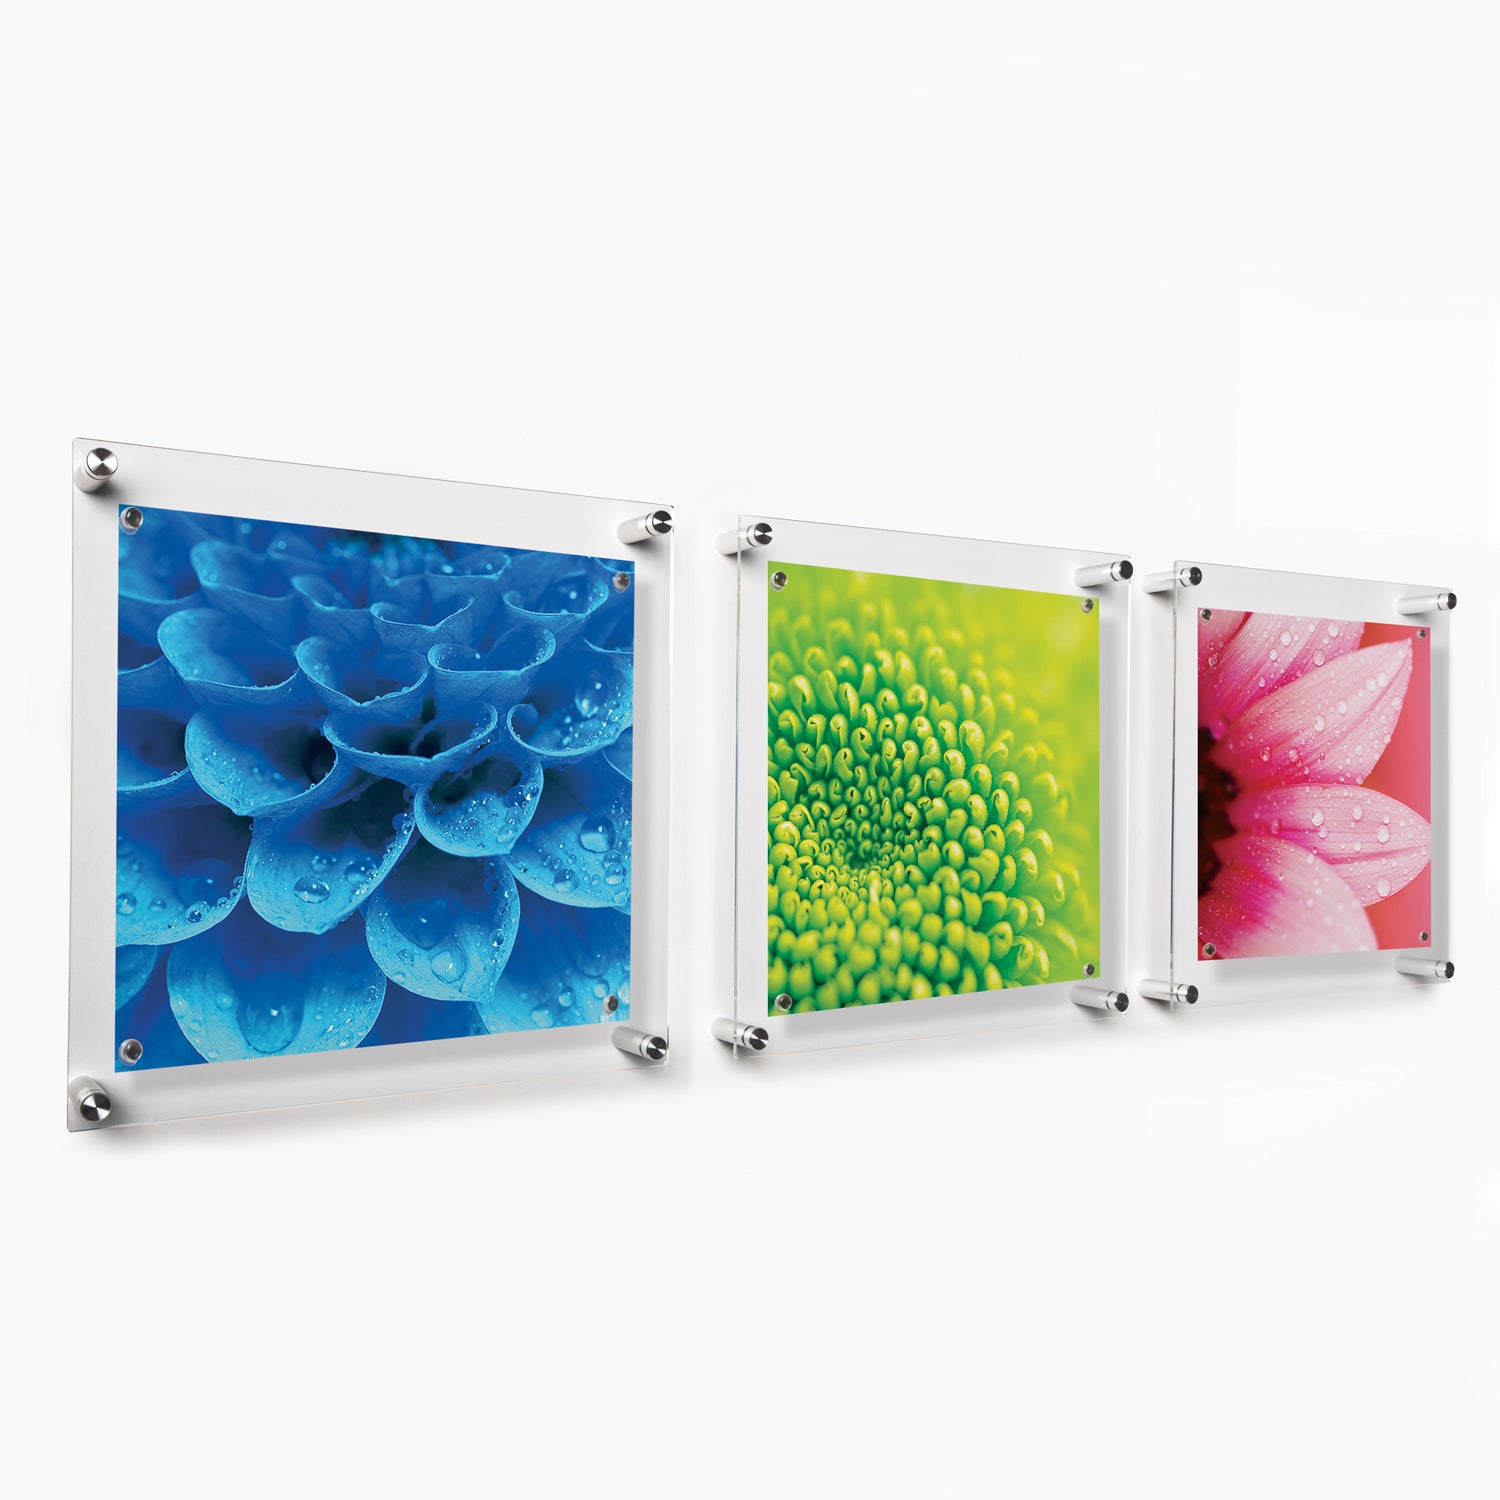 Trio: 3 Square 14" x 14" Single Panel + Magnets Frames for 12" x 12" Art (3001, 3001G)